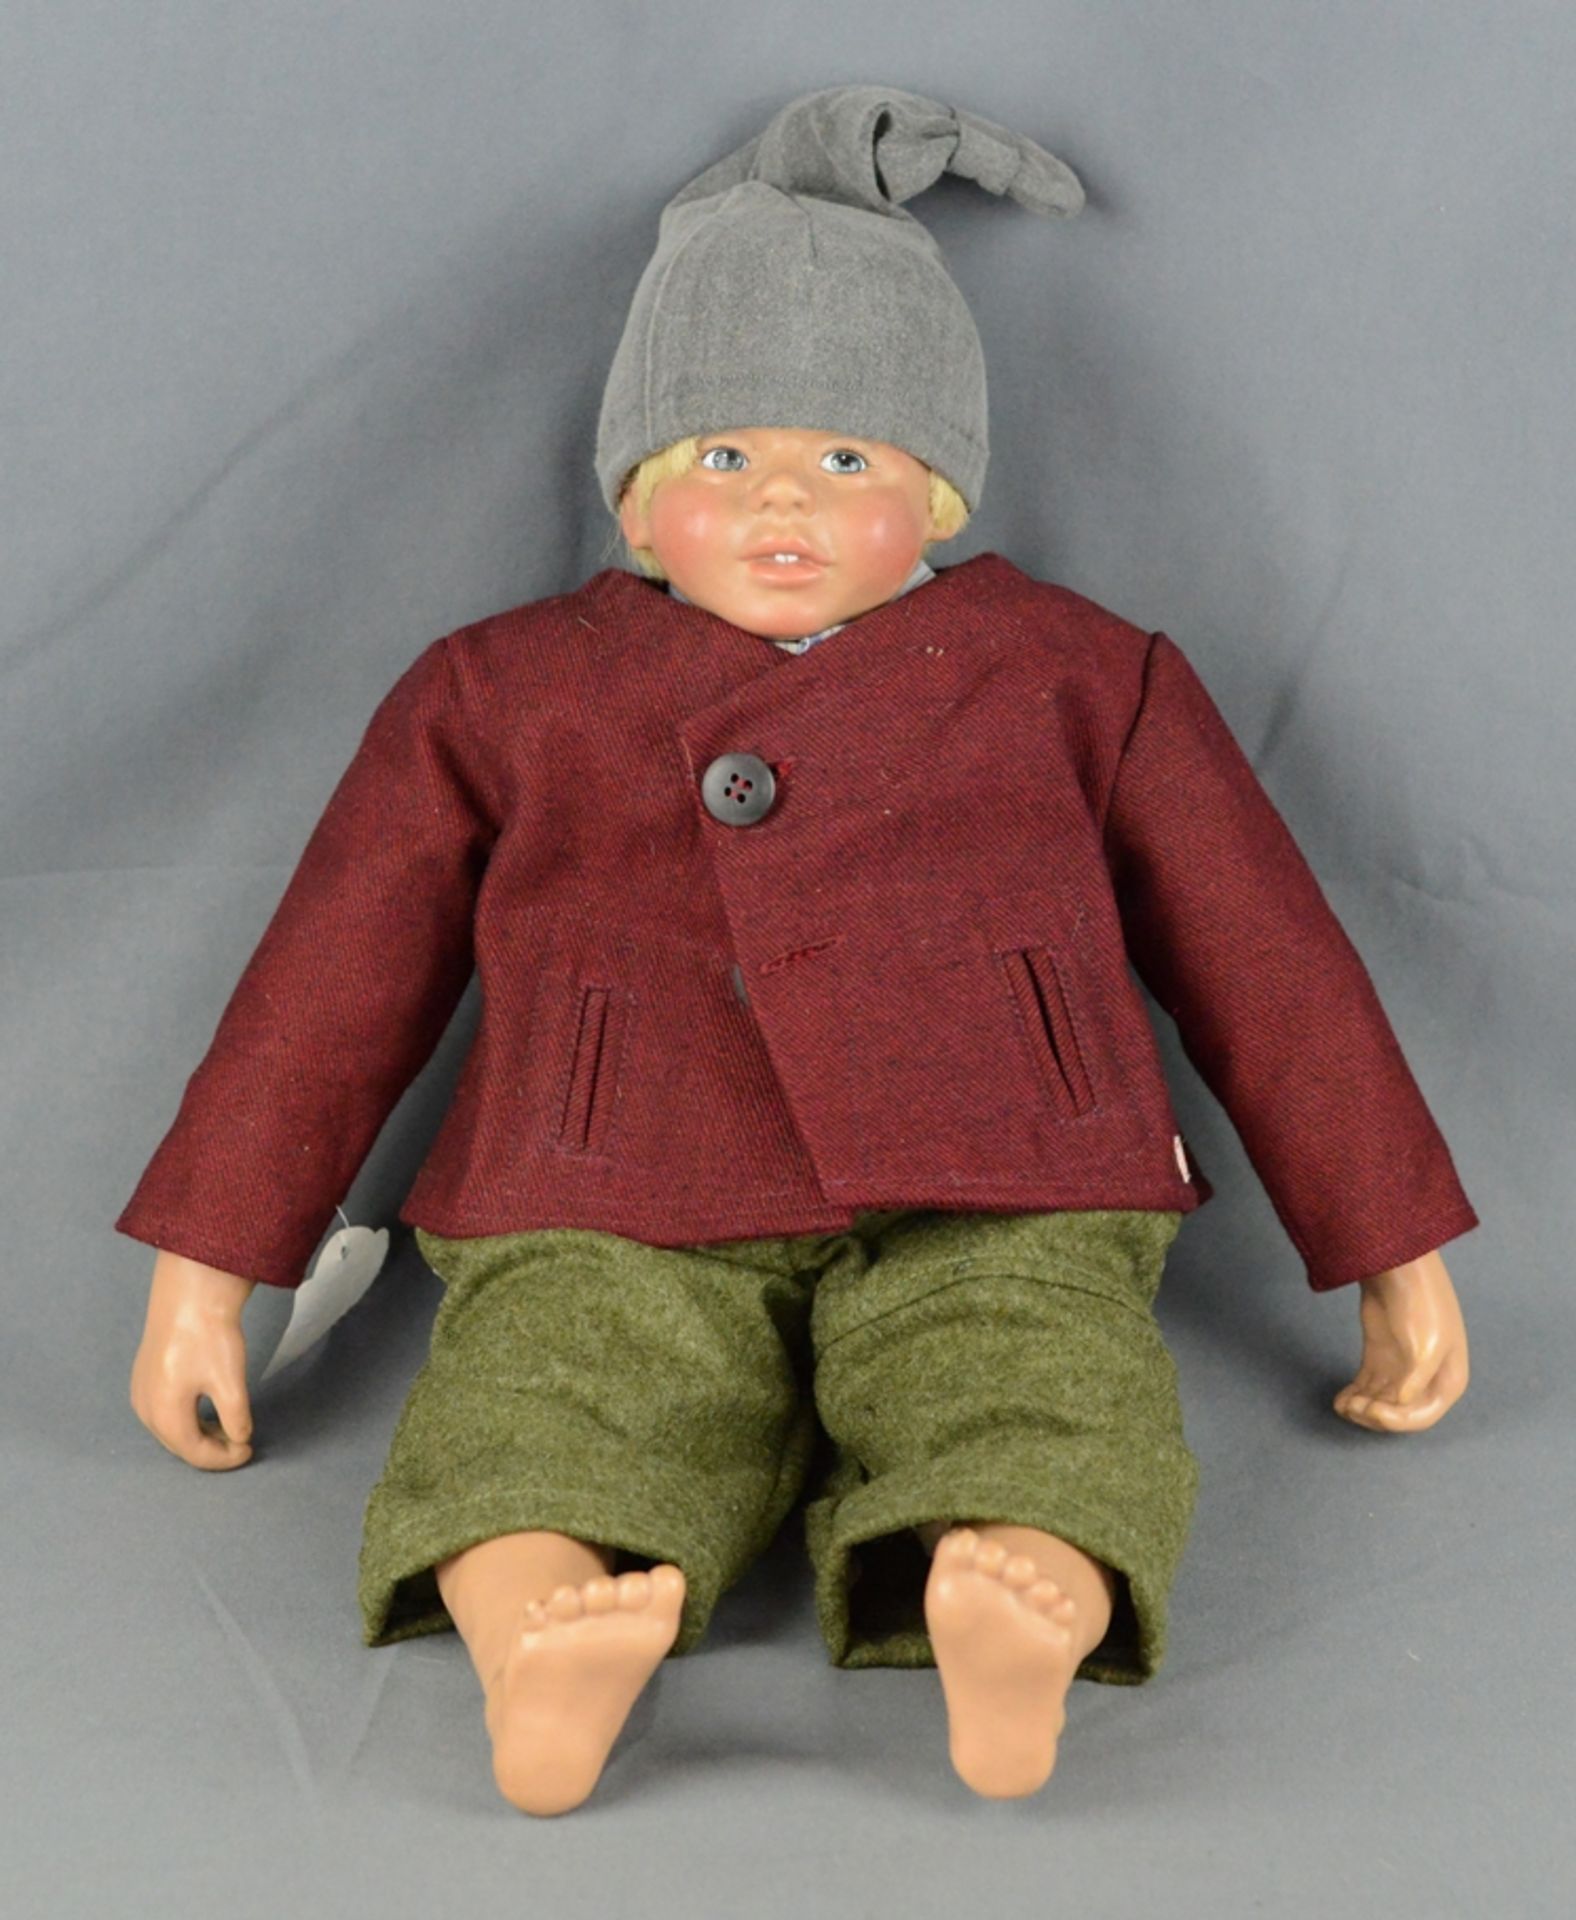 Doll, Sigikid, 24684, 18/500, boy in green pants and a red jacket, short blond human hair, height c - Image 2 of 4